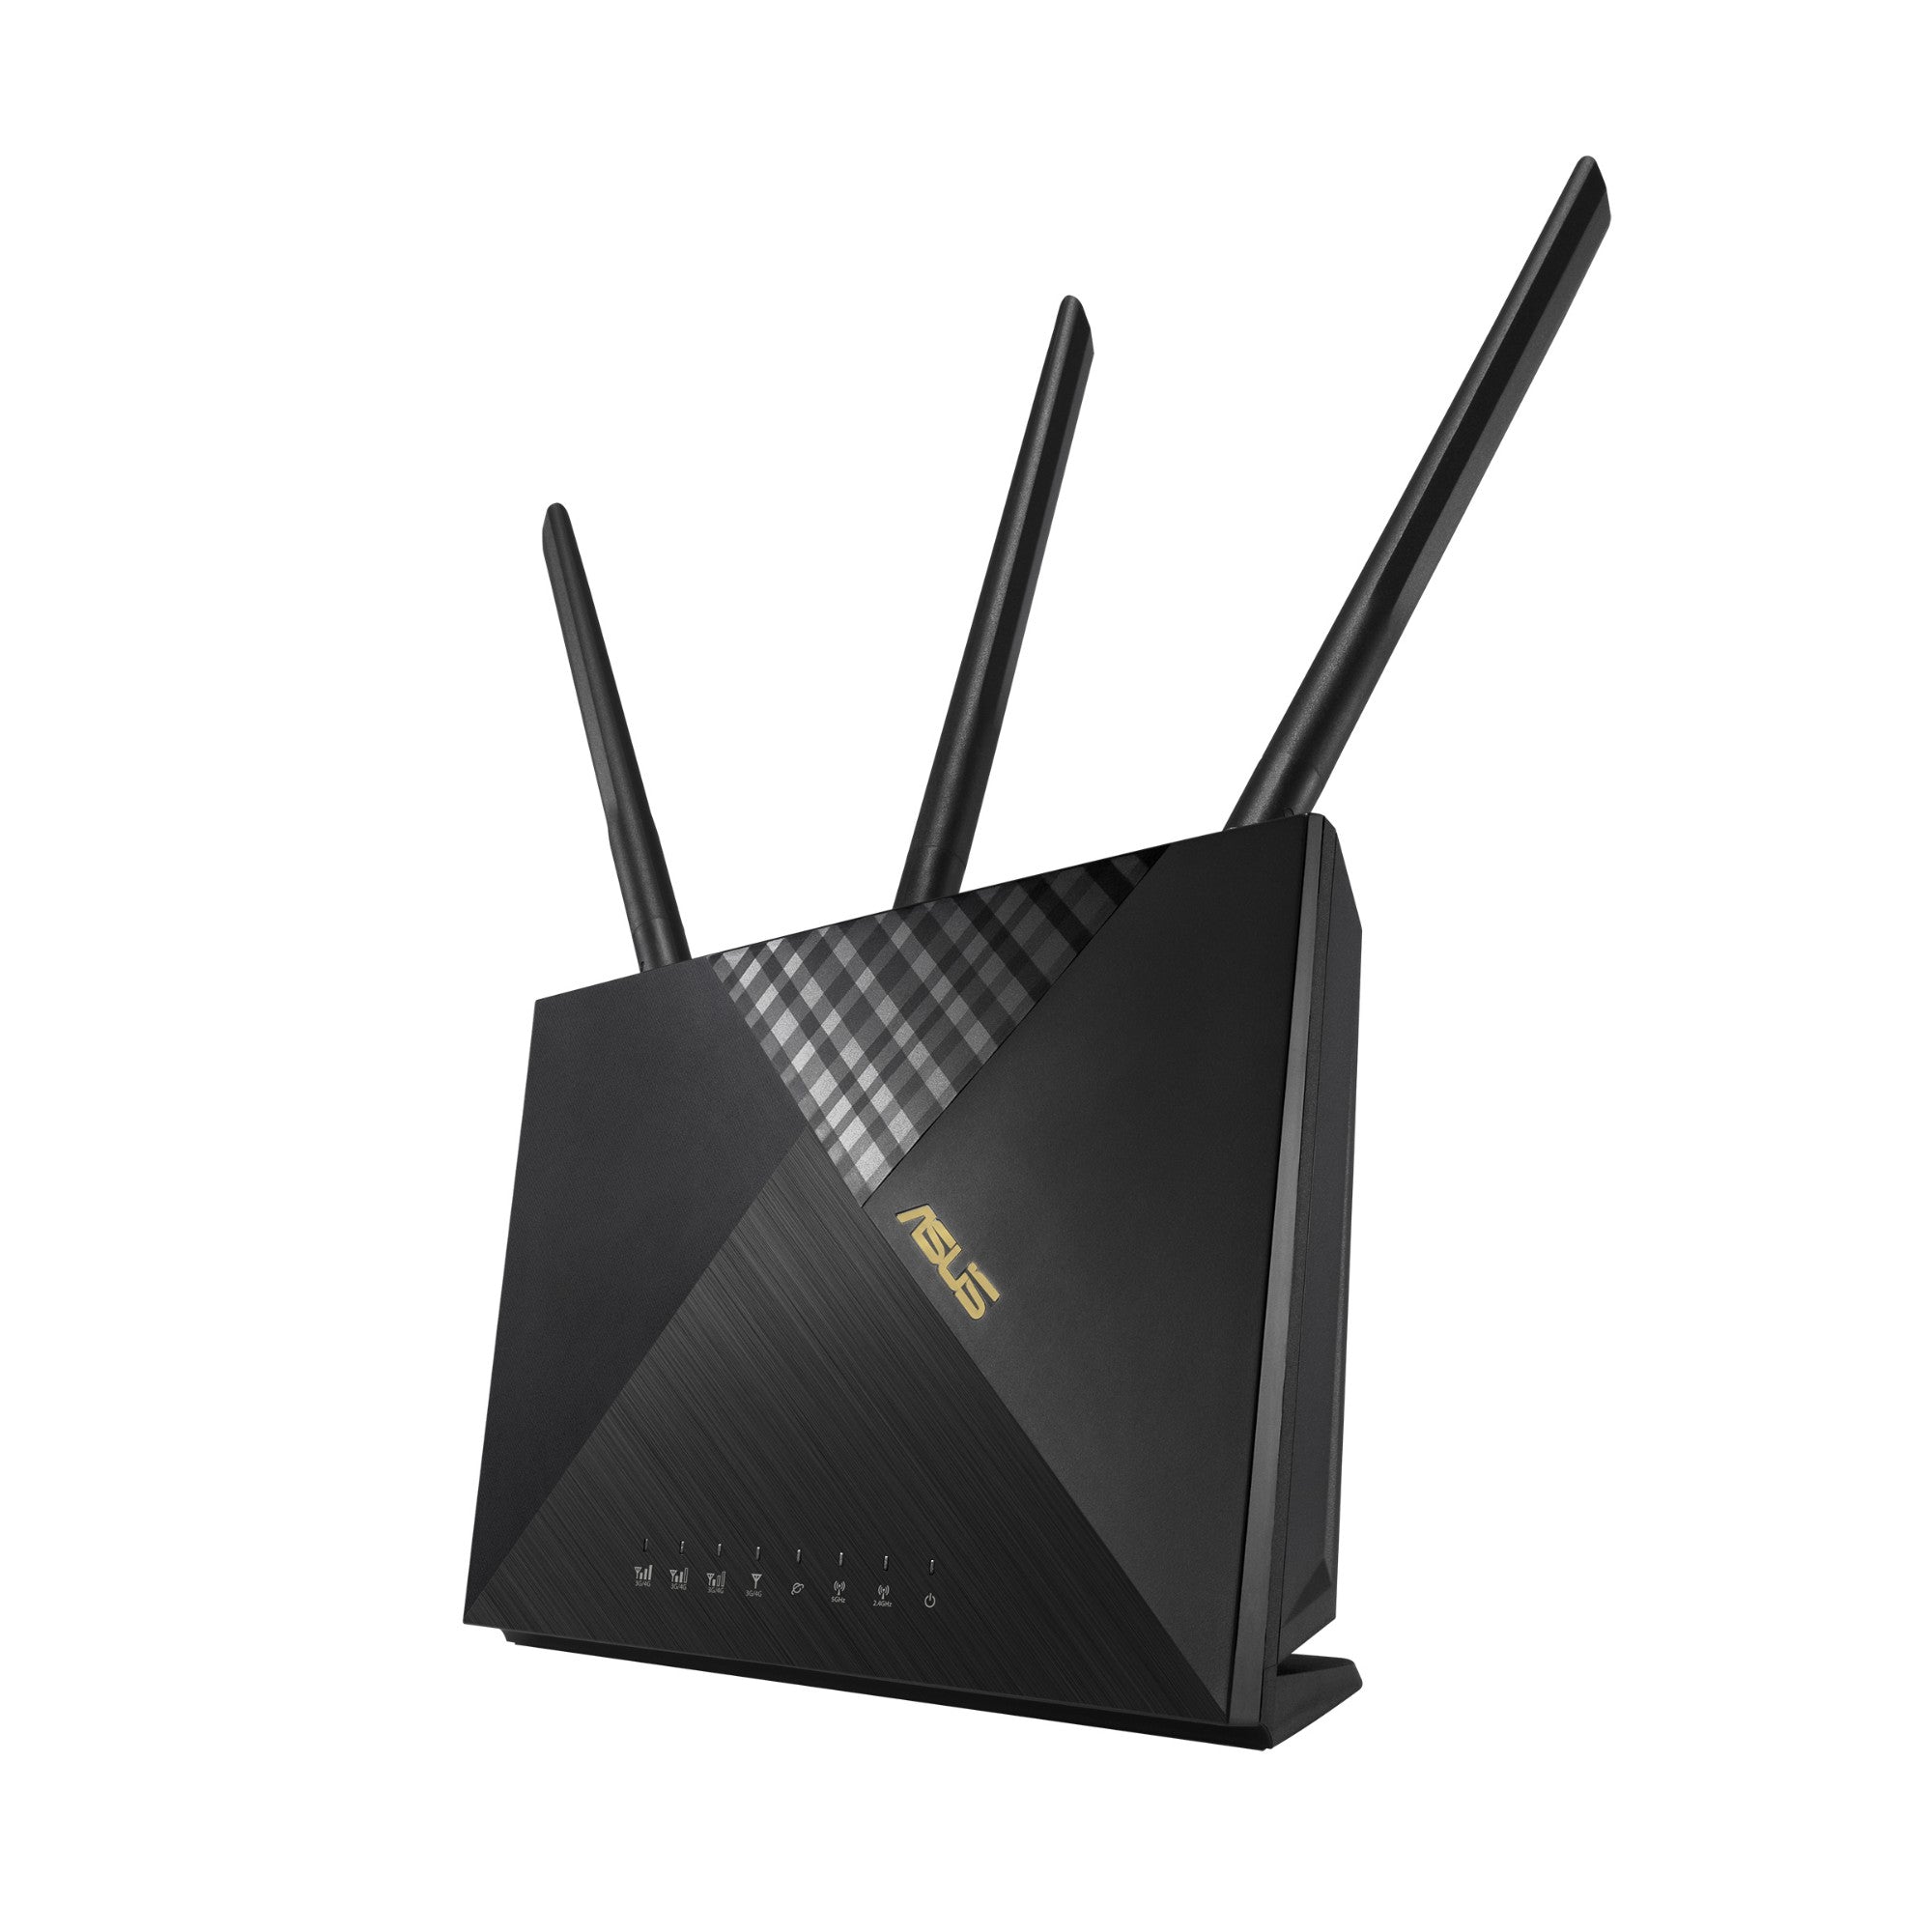 ASUS 4G-Ax56 Wireless Router Gigabit Ethernet Dual-Band (2.4 Ghz 5 Ghz) 3G 5G Black-(90IG06G0-MO3110)